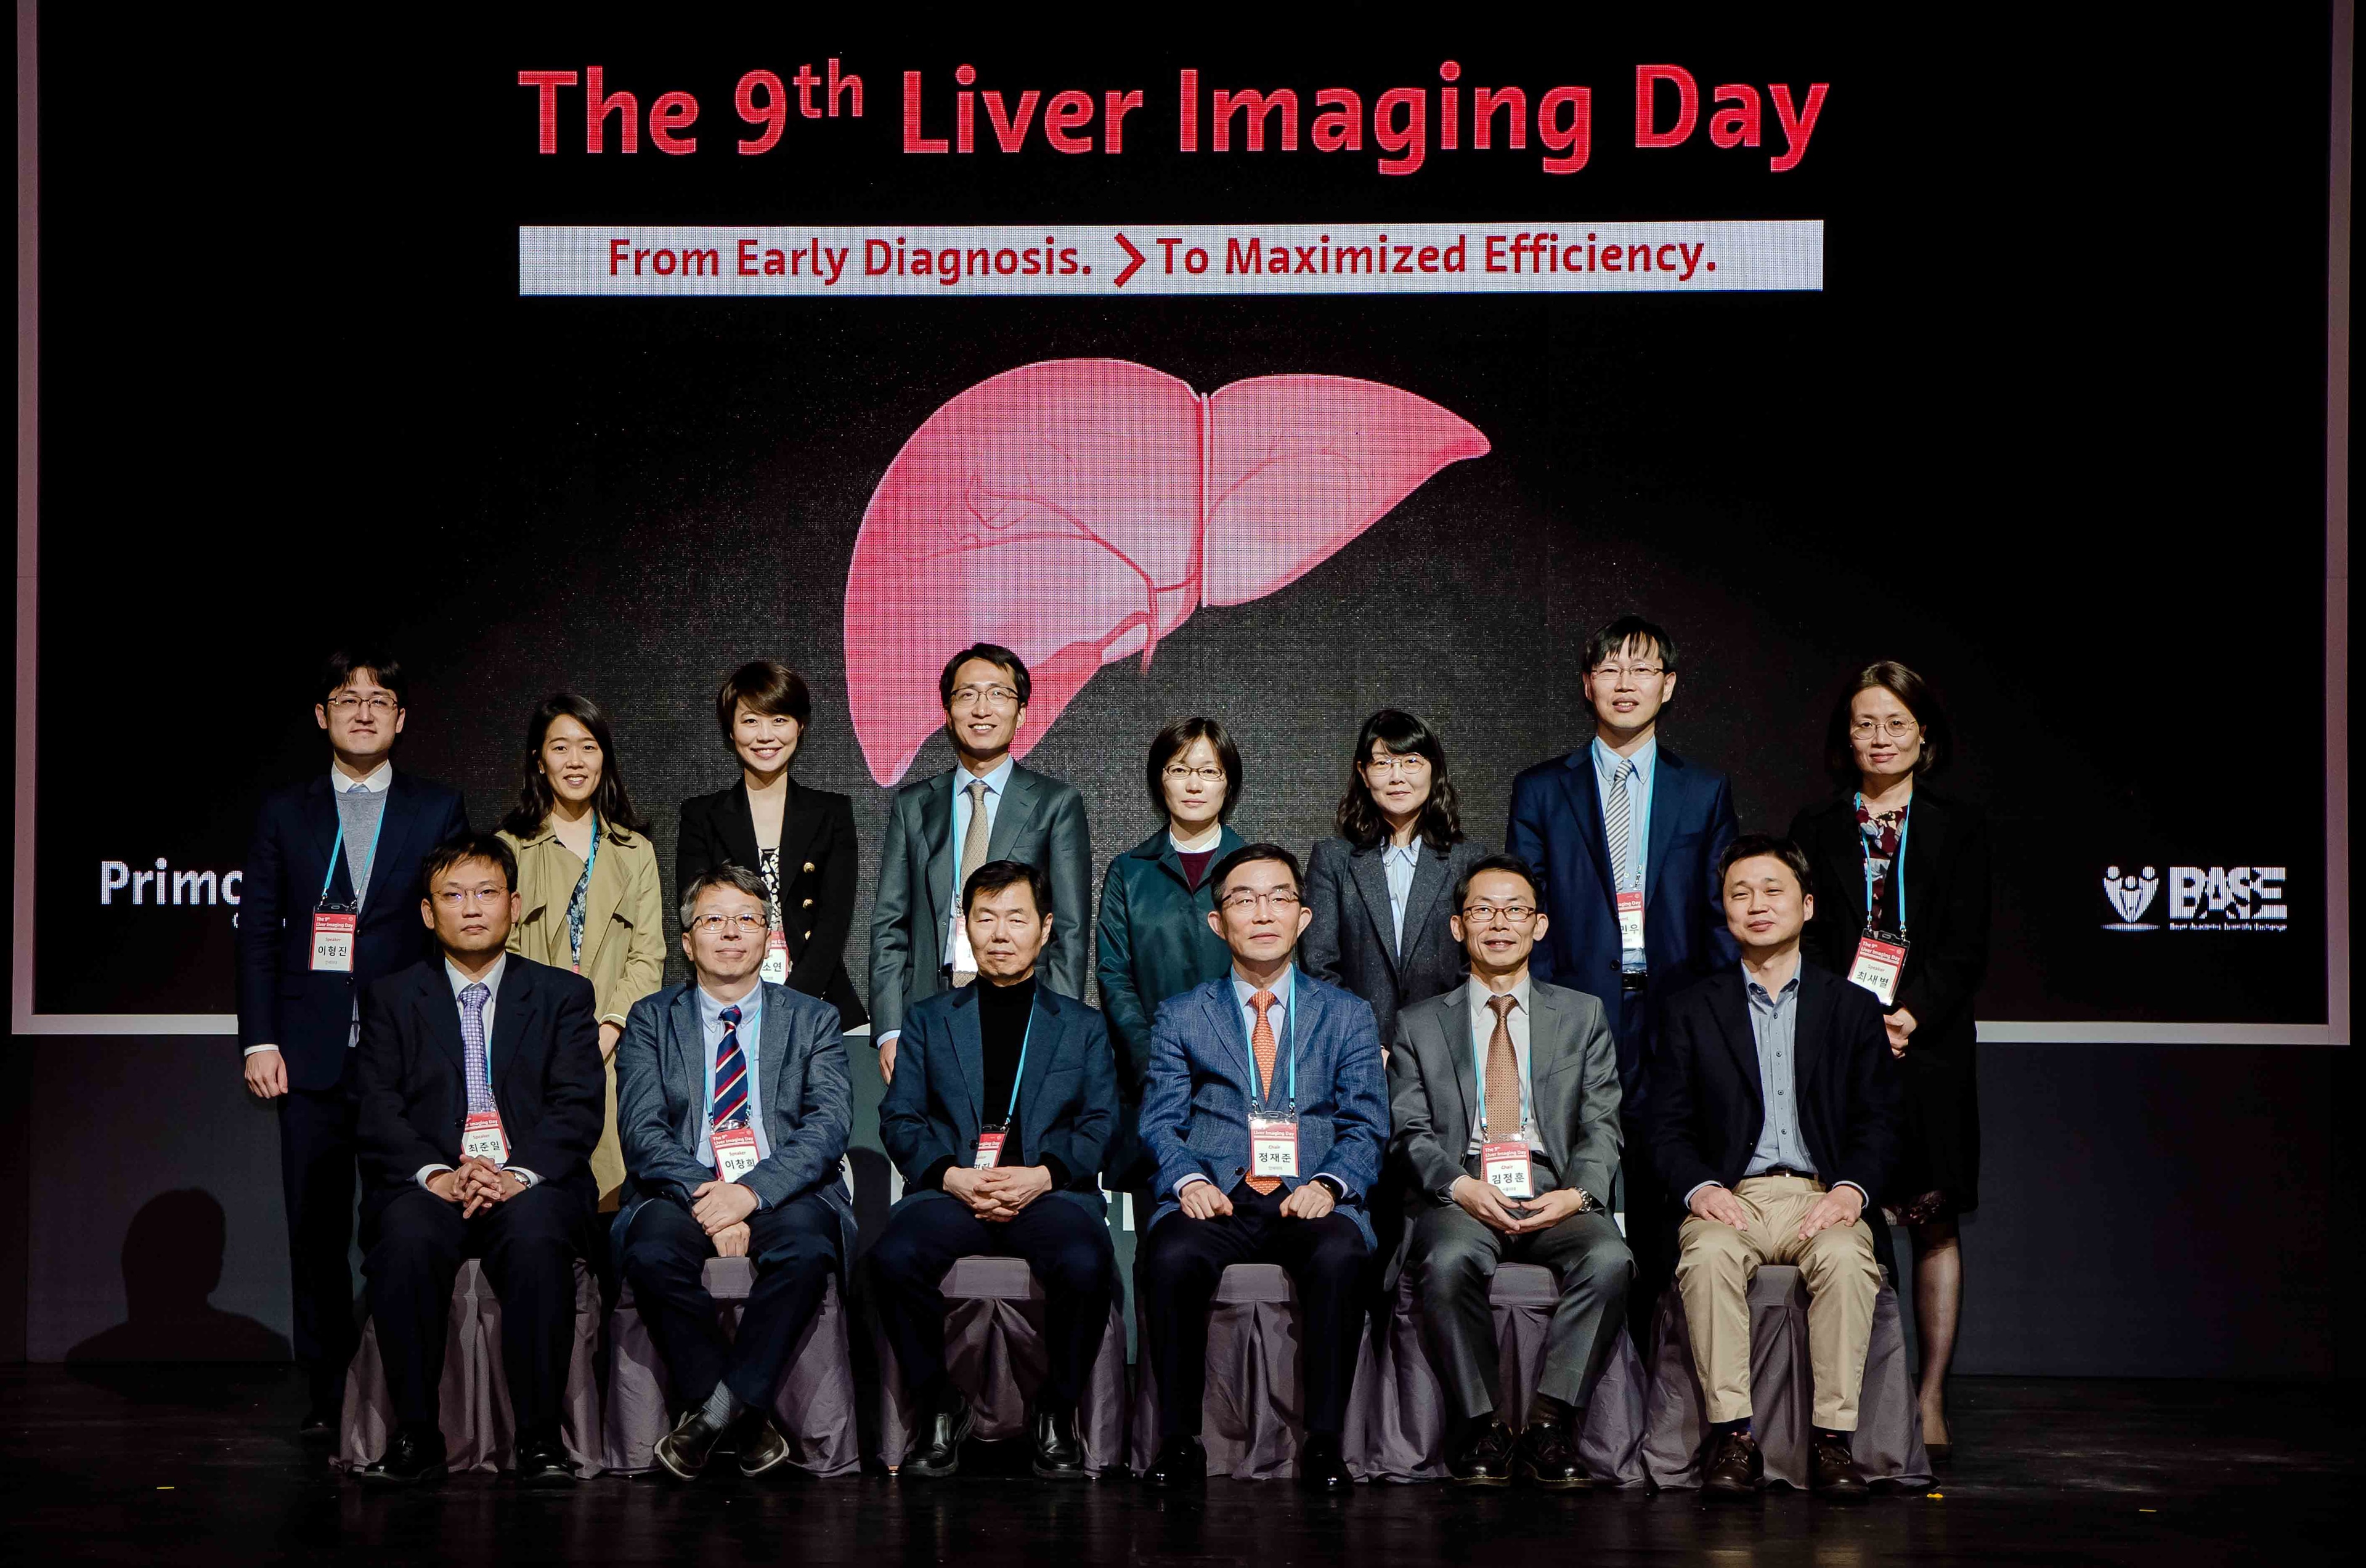 Liver imaging day 2019 preview image